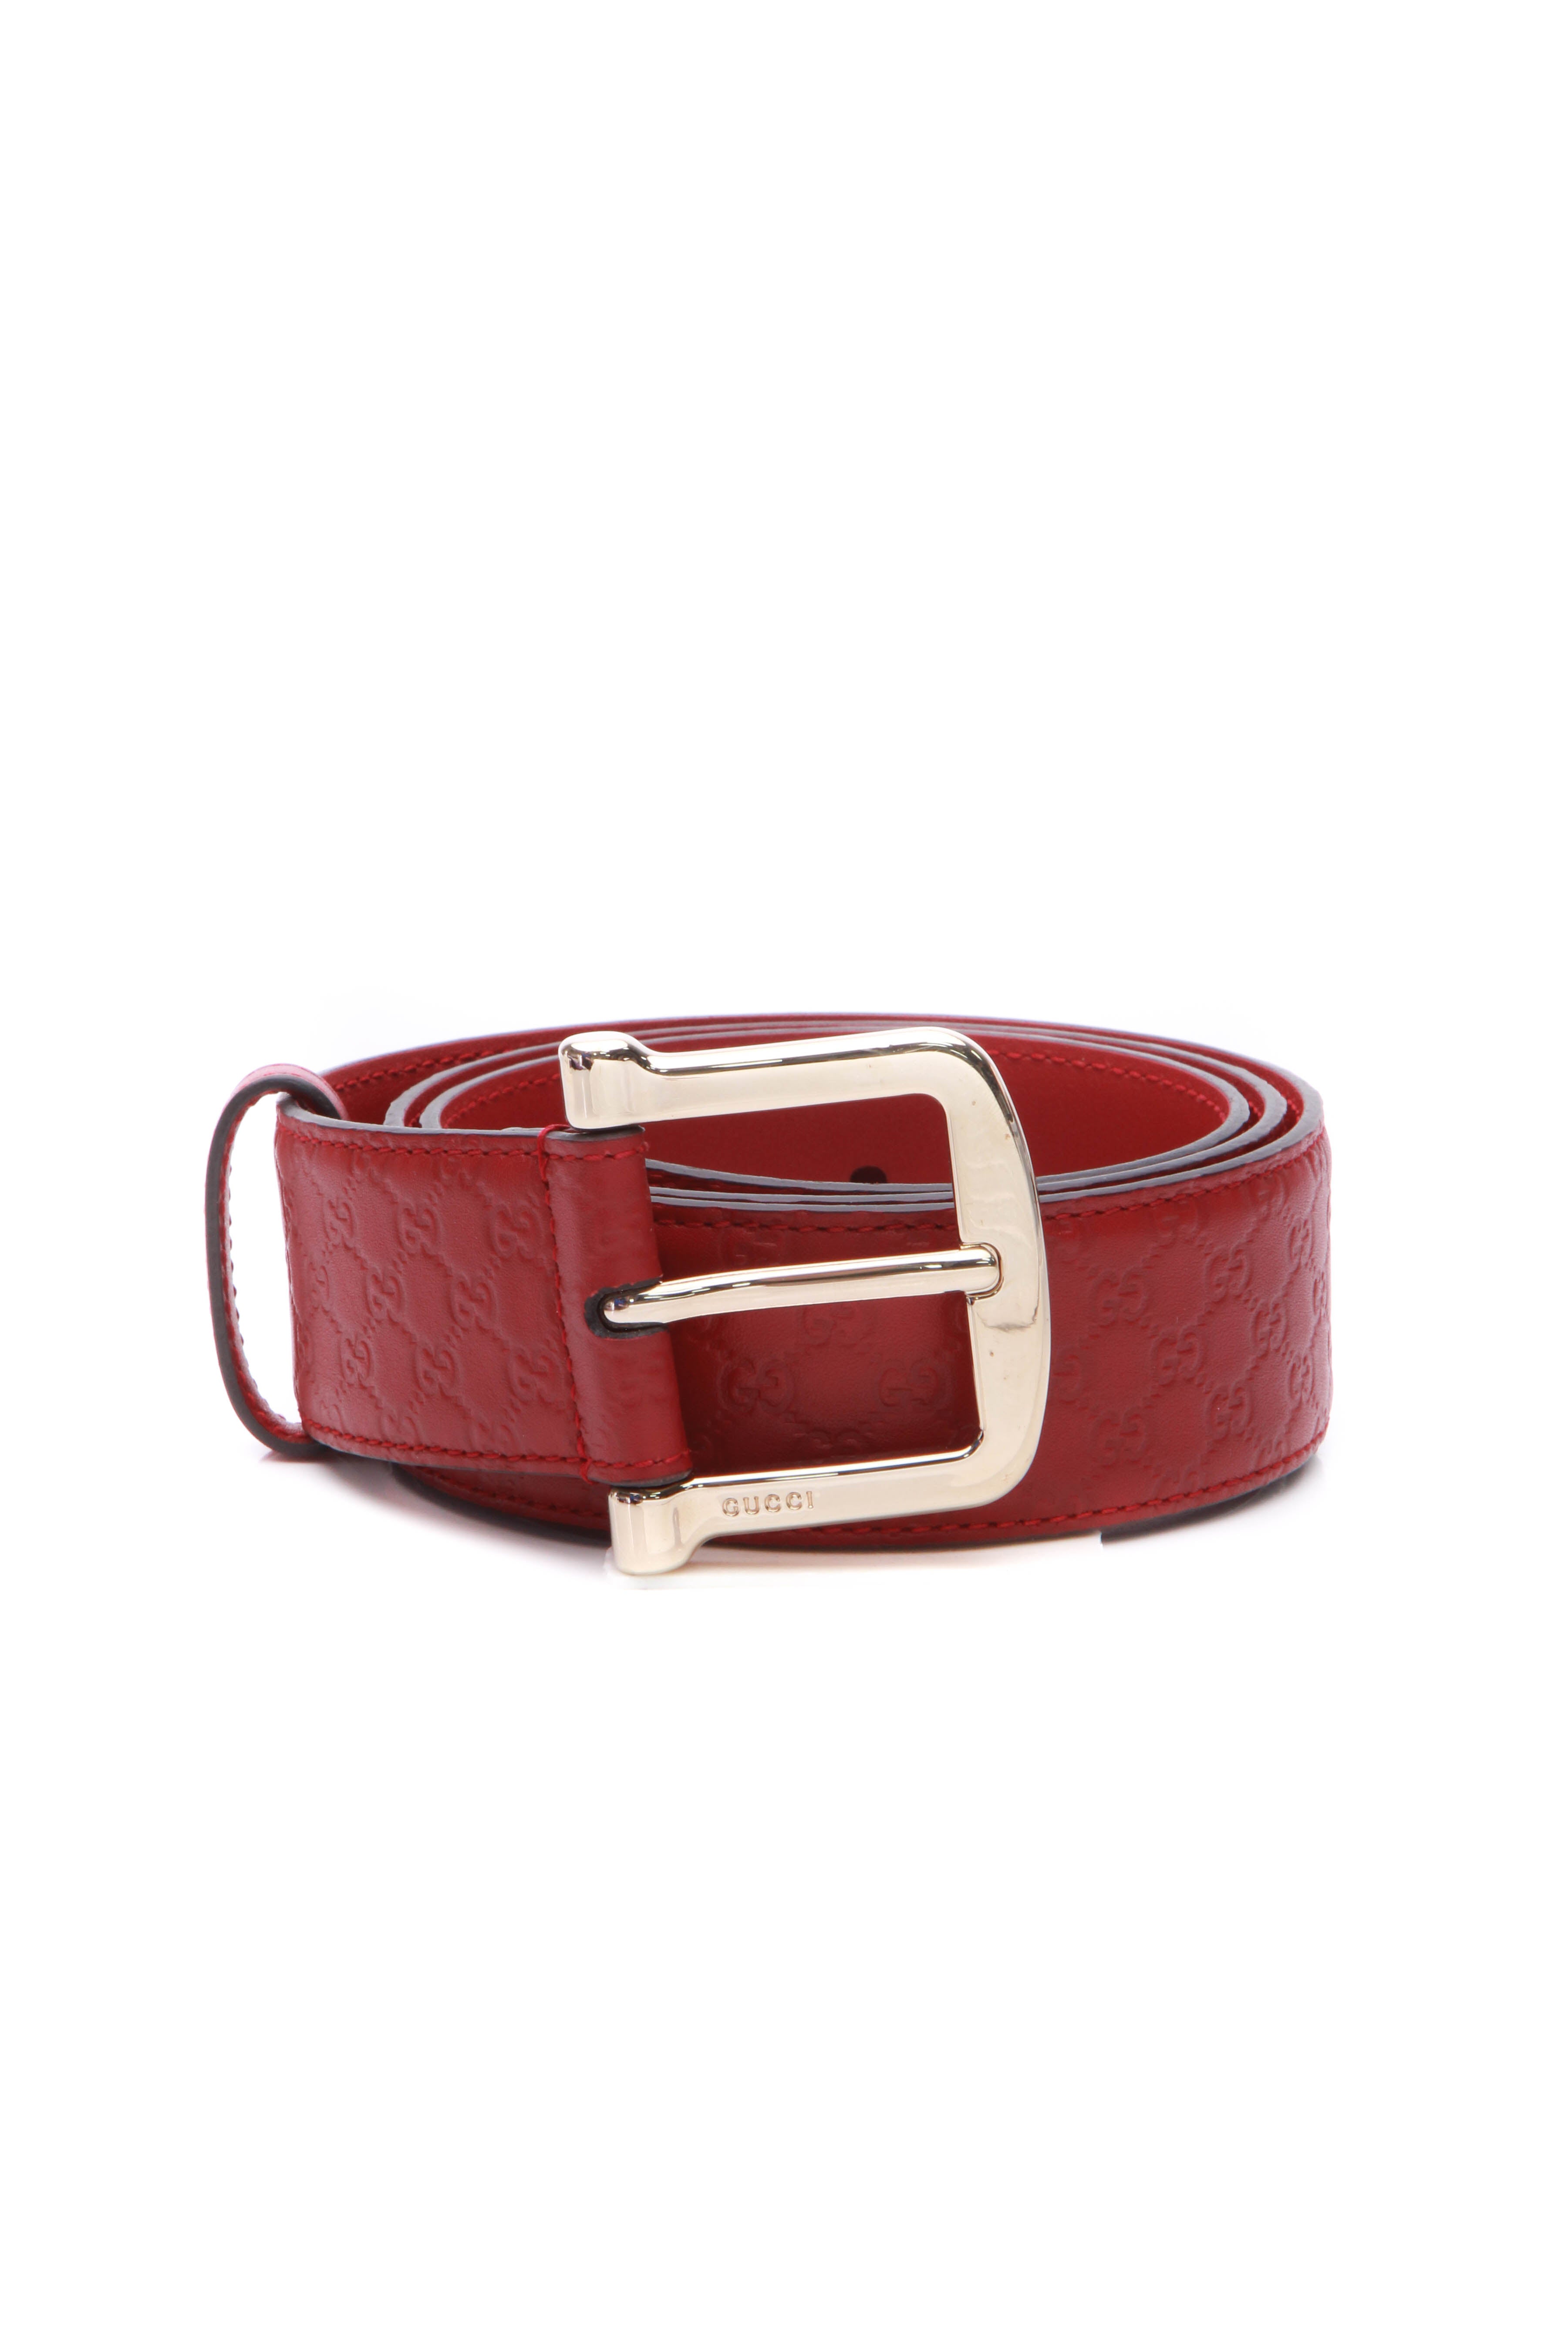 Gucci Women's Red Leather GG Microguccissima Buckle Belt, 34, Red at   Women's Clothing store